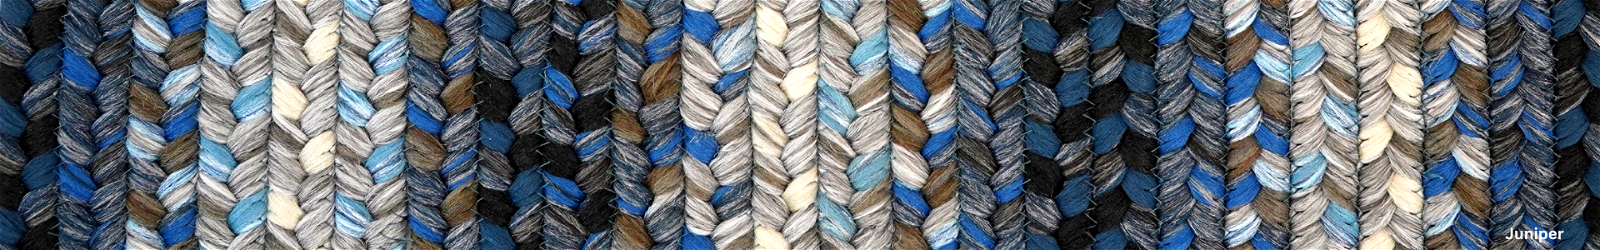 Polyester - Blue Braided Rugs